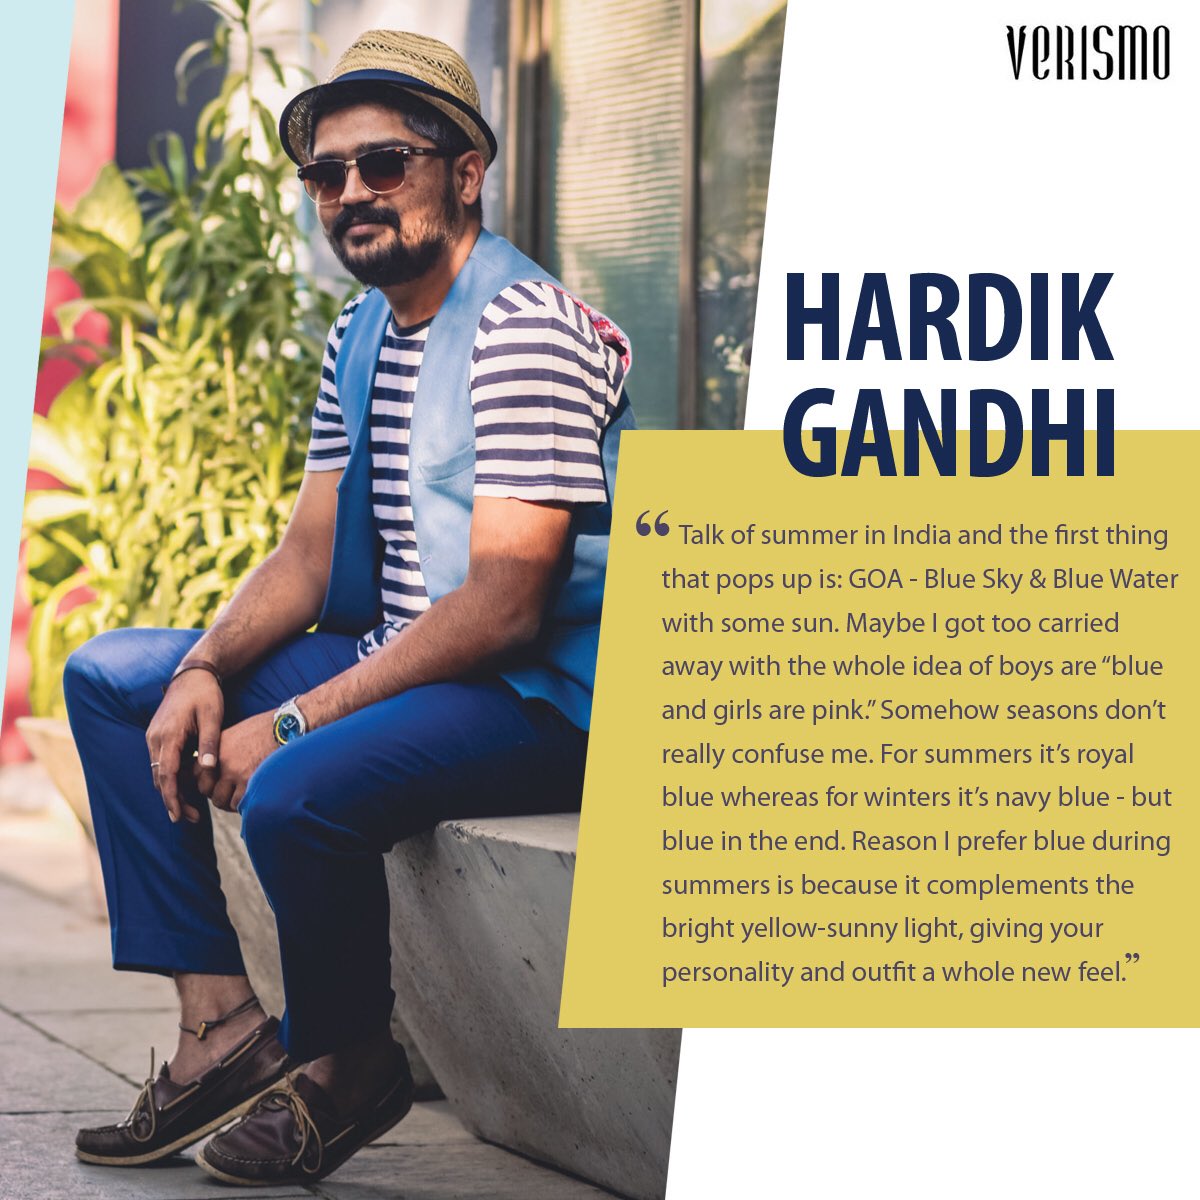 #FashionBlogger Hardik Gandhi tells us about his favourite colour for the #Summer #Trends https://t.co/4S3ya9Fp7d